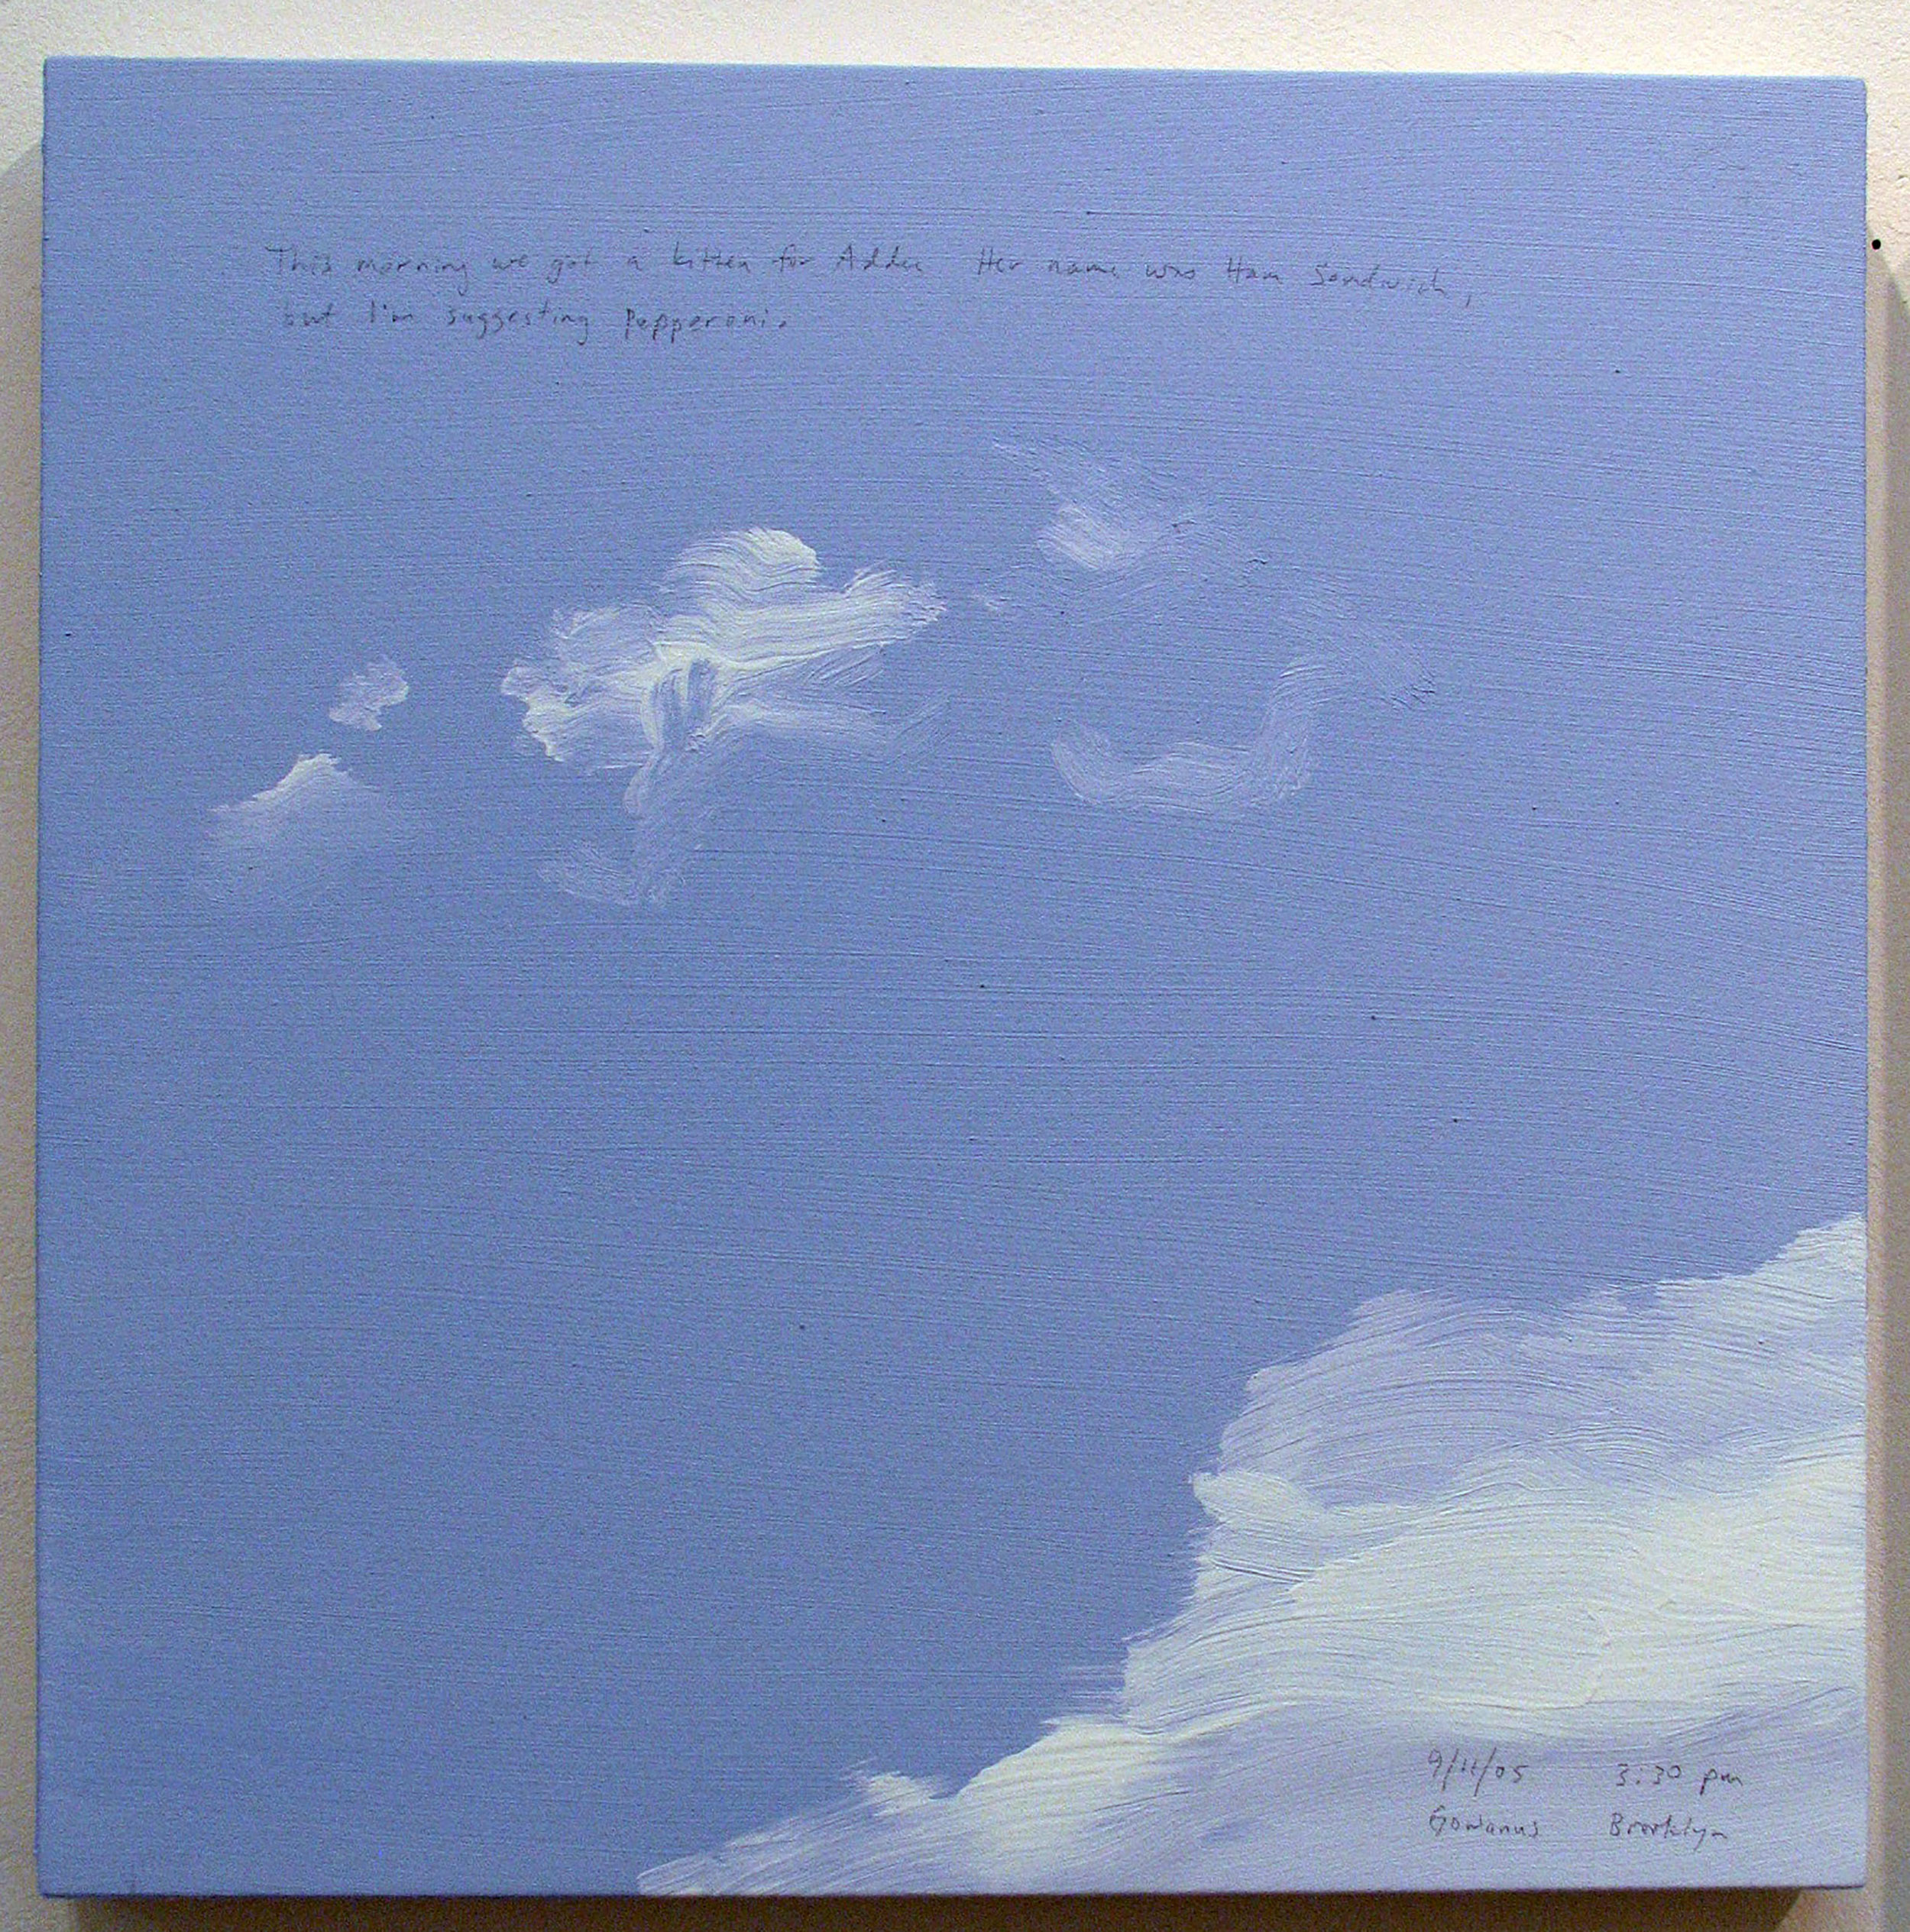 A 14 × 14 inch, acrylic painting of the sky. A journal entry is handwritten on the painting:

“This morning we got a kitten for Addee. Her name was Ham Sandwich, but I’m suggesting Pepperoni.

9/11/05 3:30 pm
Gowanus, Brooklyn”